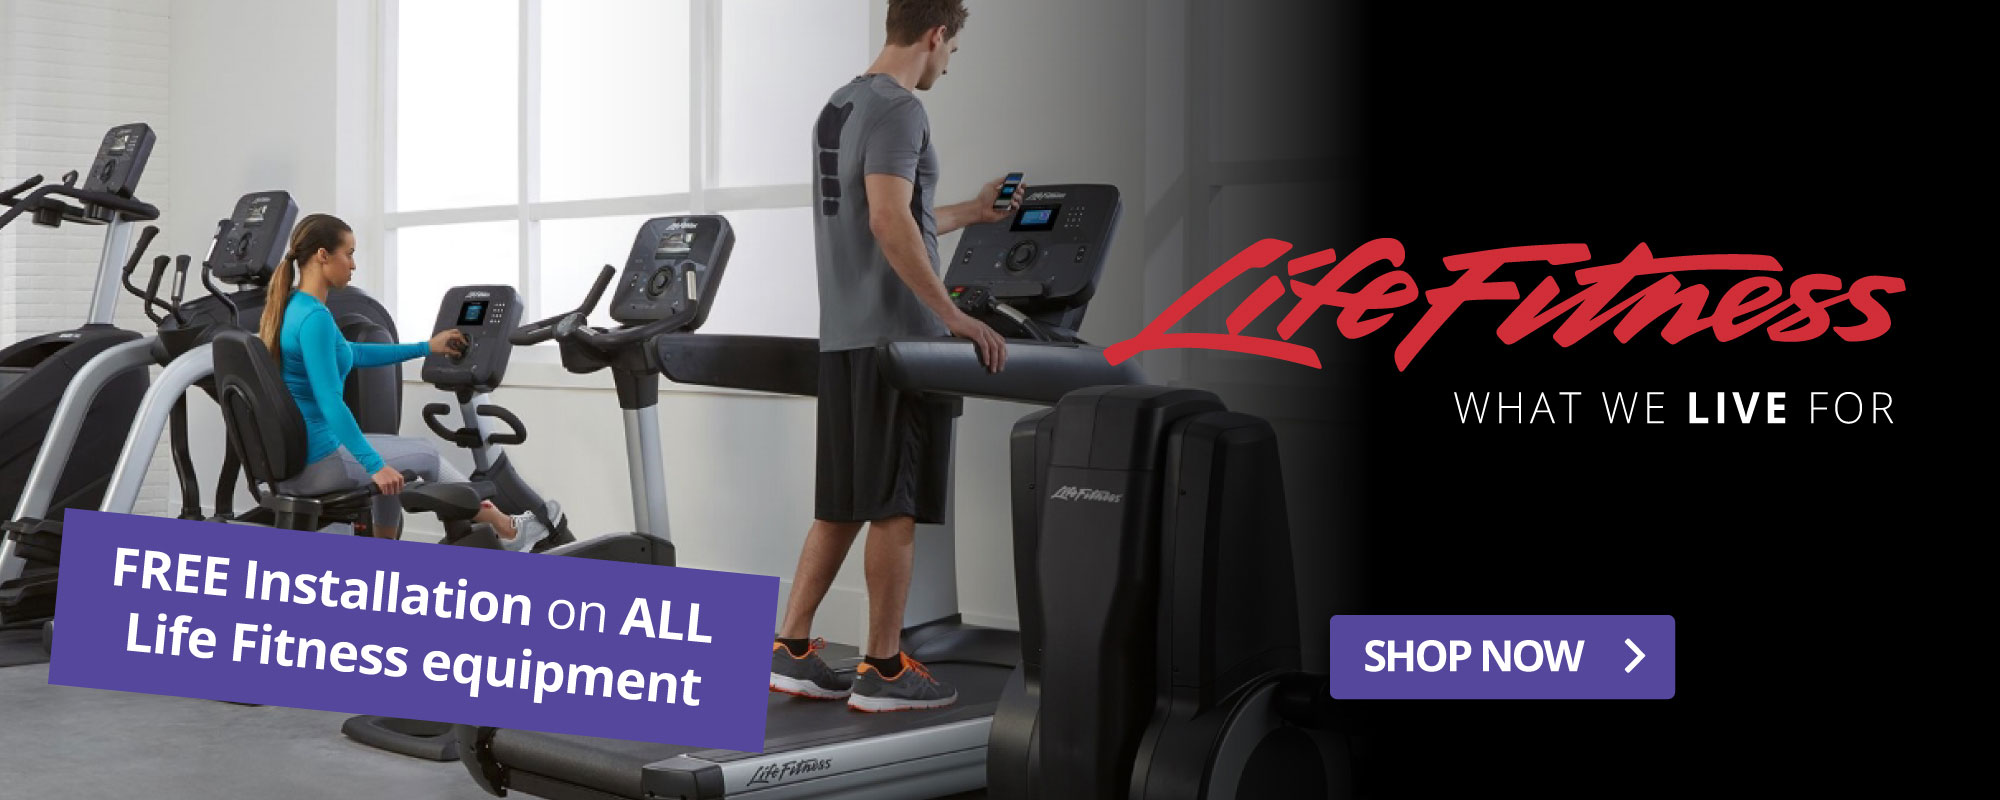 FREE Installation on ALL Life Fitness equipment - Shop Now